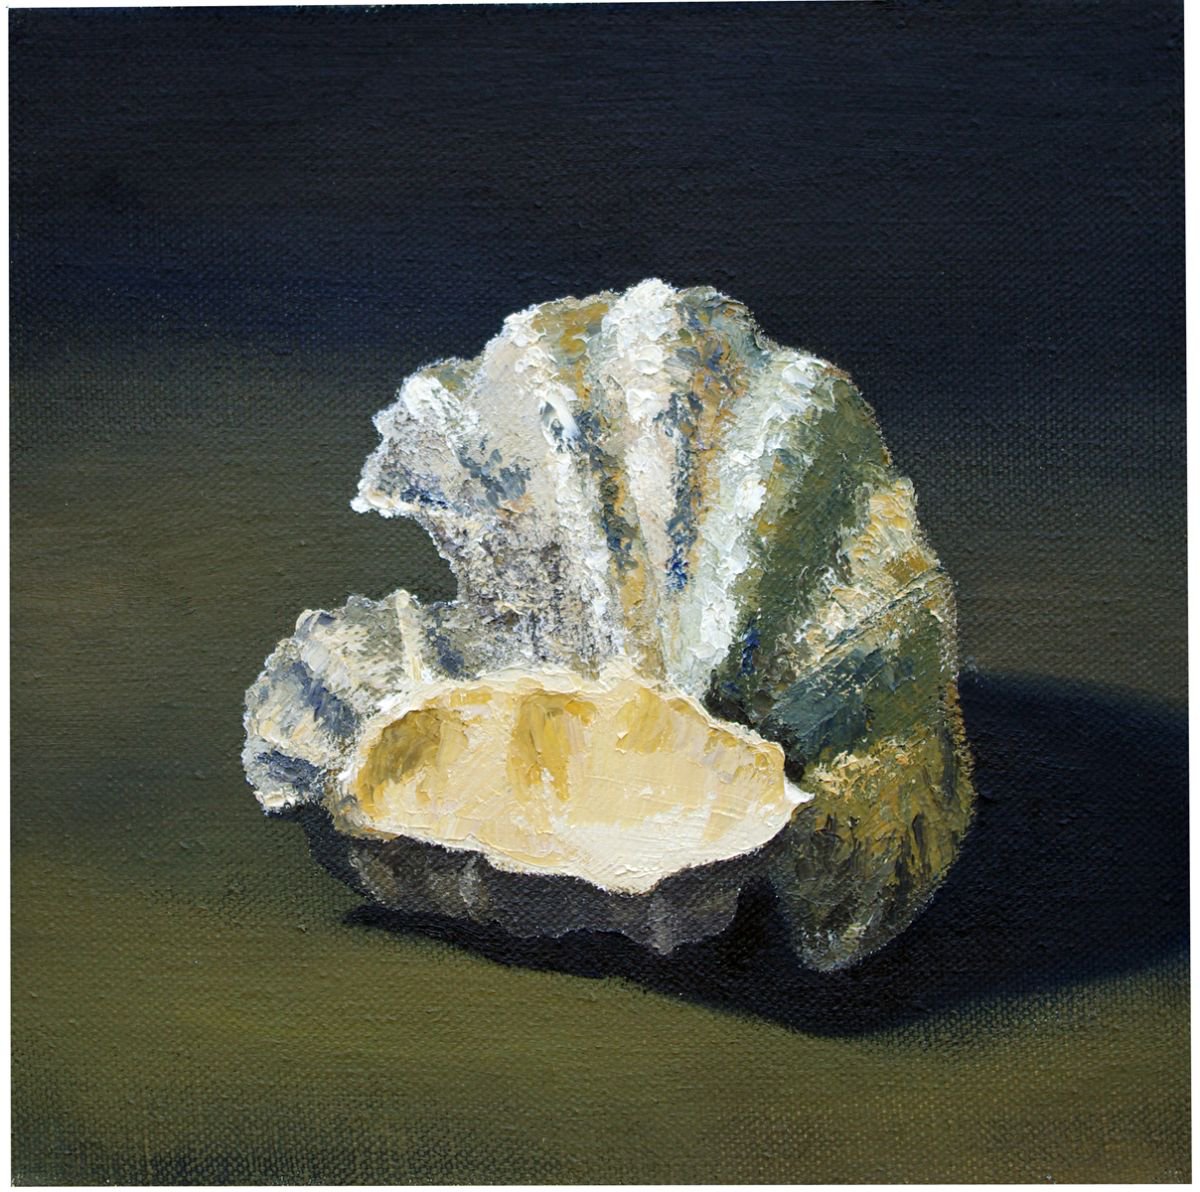 OYSTER SHELLS by Richard Manning